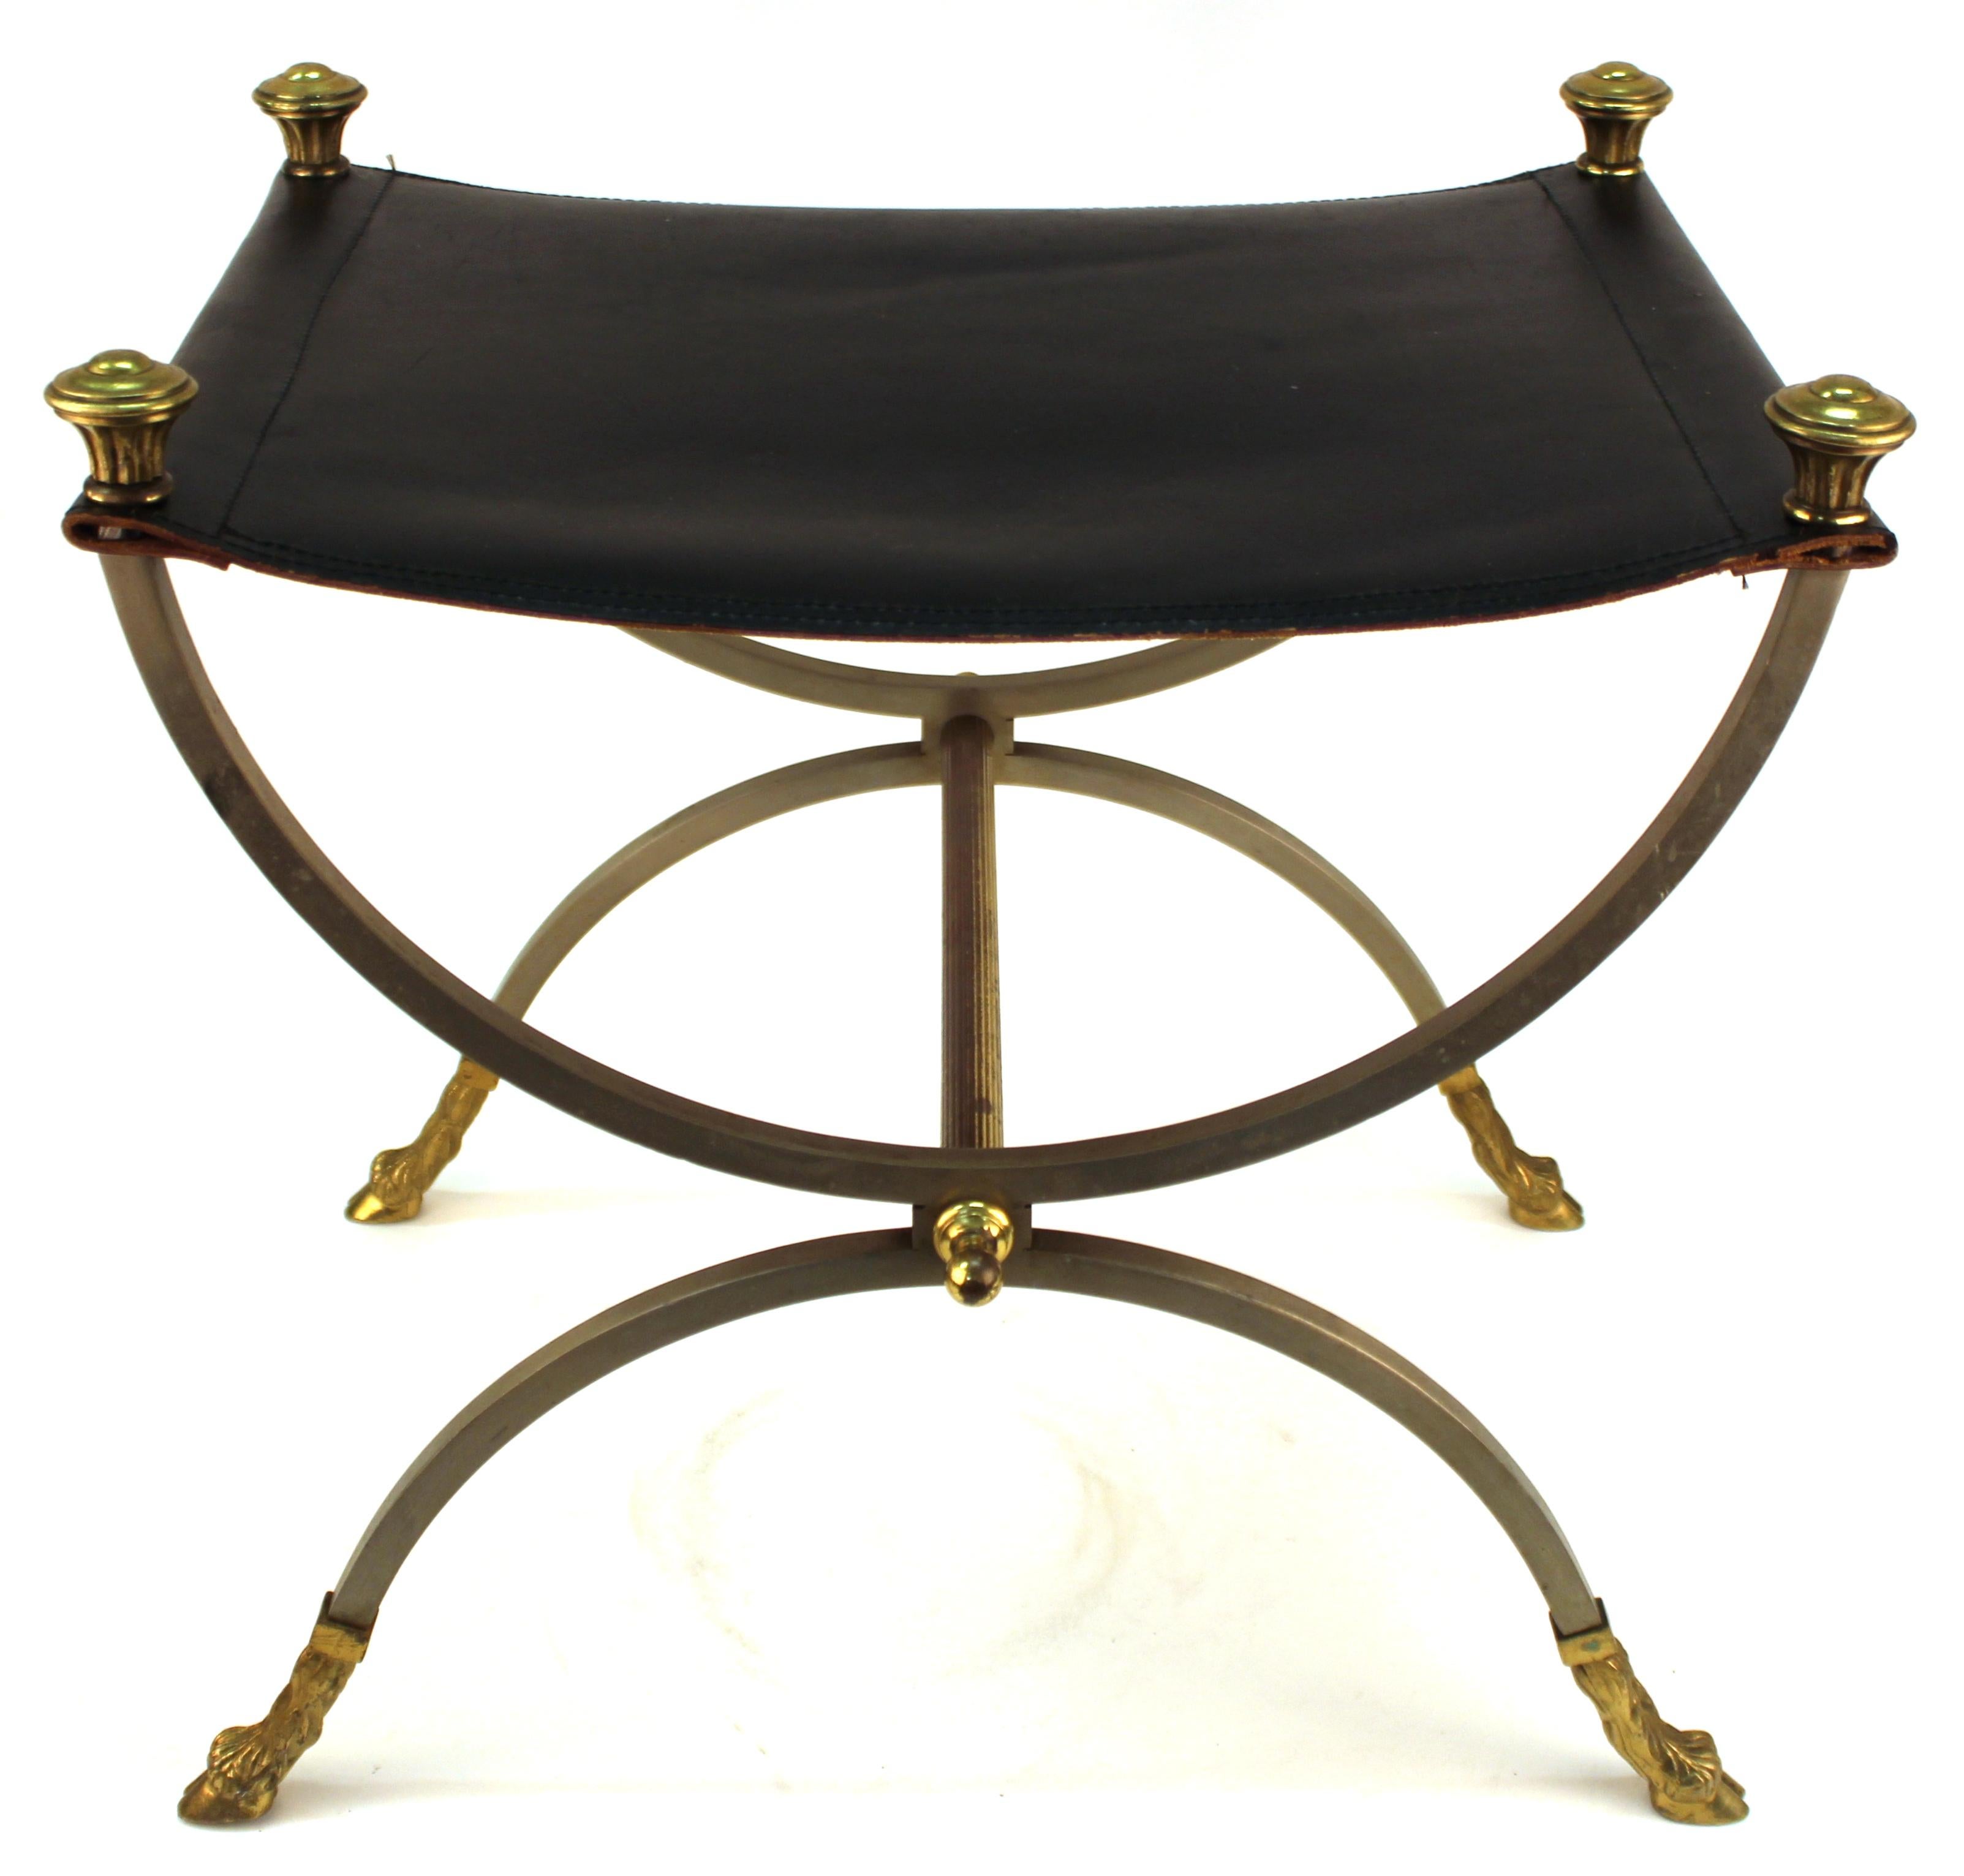 French neoclassical Revival style bench made by Maison Jansen. The piece has a metal structure with gilt decorative elements and hoofed feet and has a black leather seat. In great vintage condition with some age-appropriate wear to the leather.